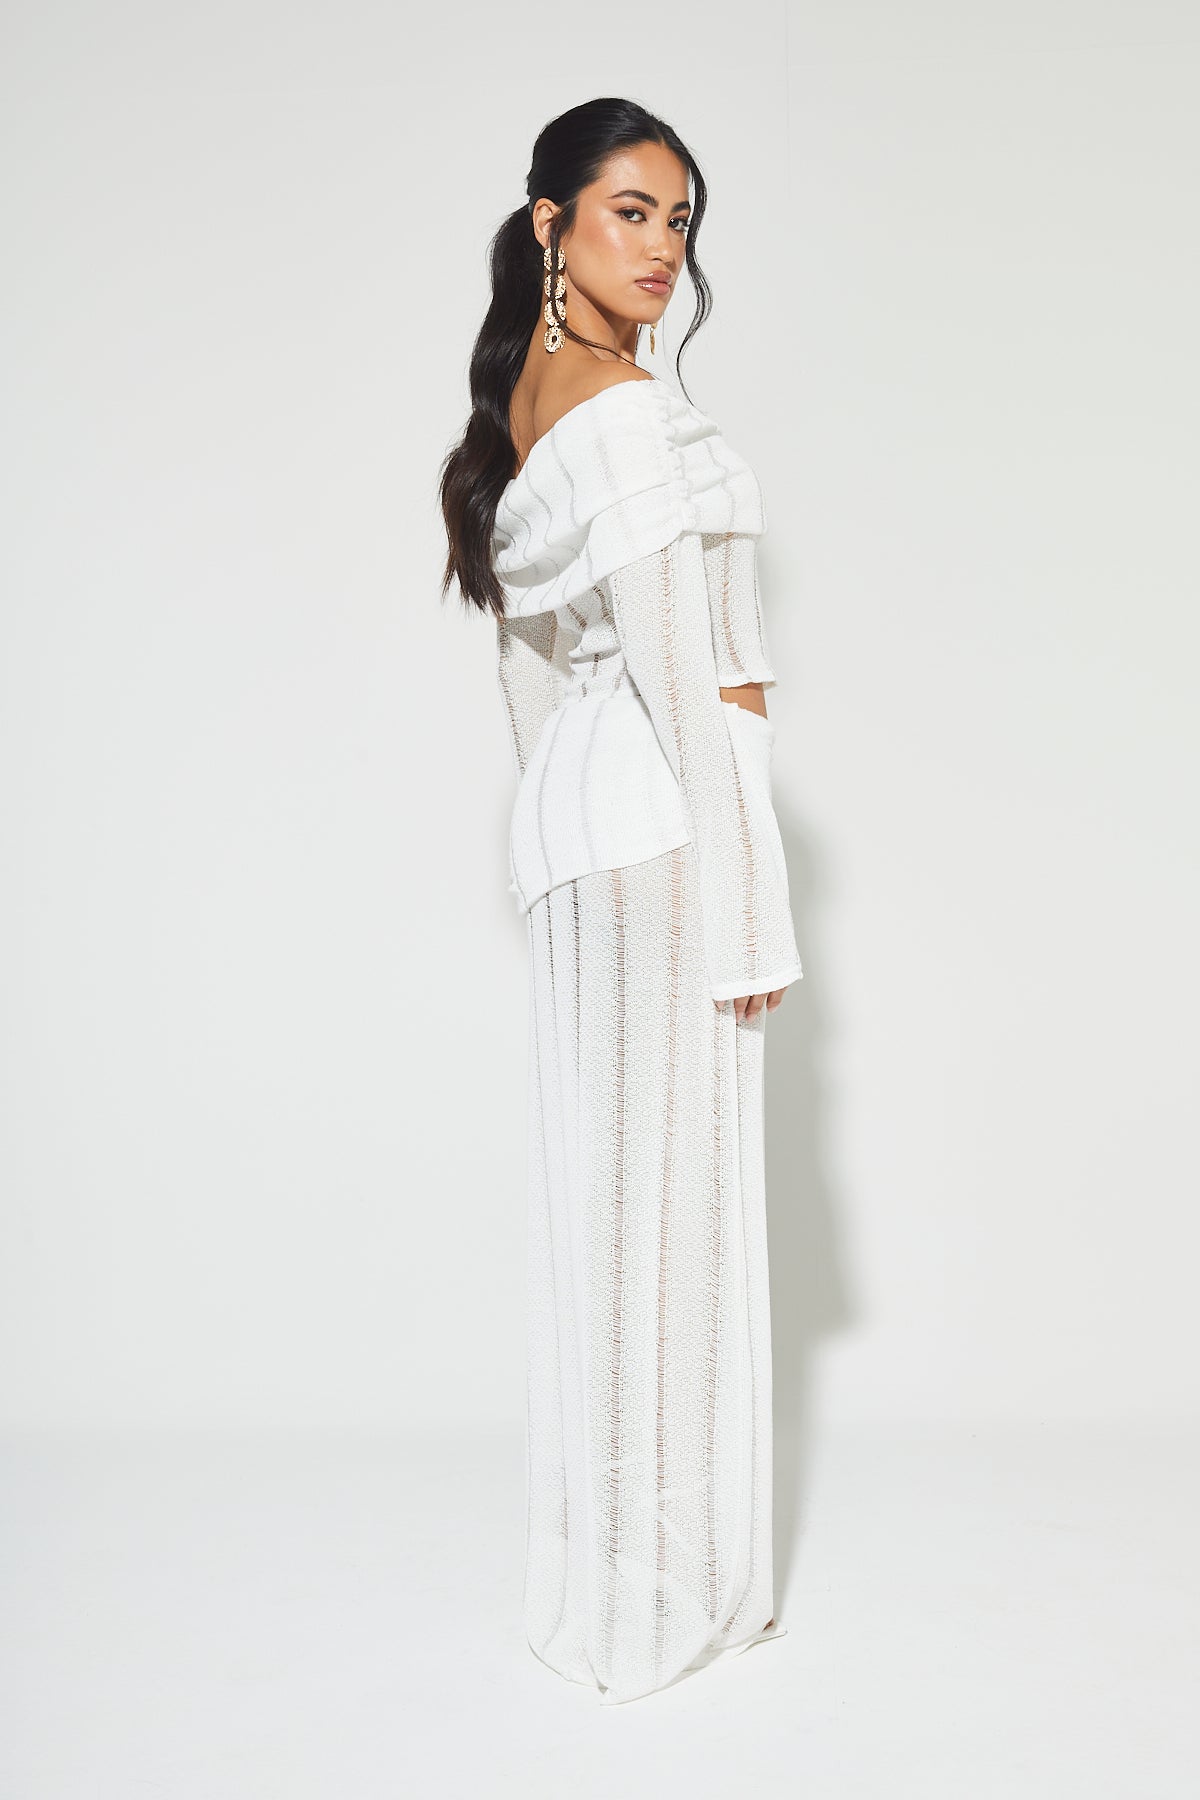 NORI White Knit Top and Maxi Skirt Co Ord